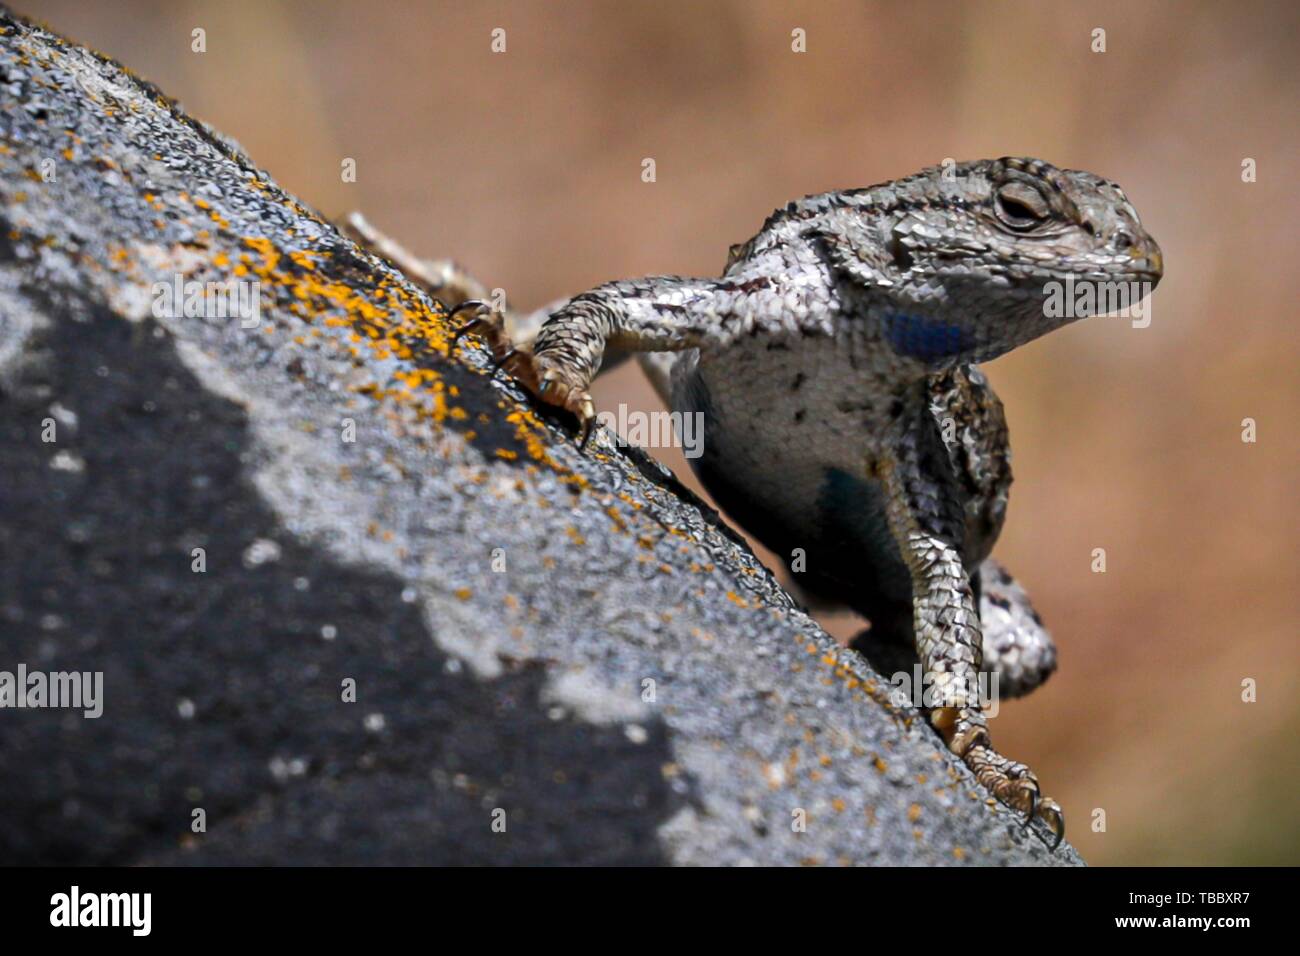 A western fence lizard sunning on a rock May 26, 2019 in Goldendale, Washington. Stock Photo